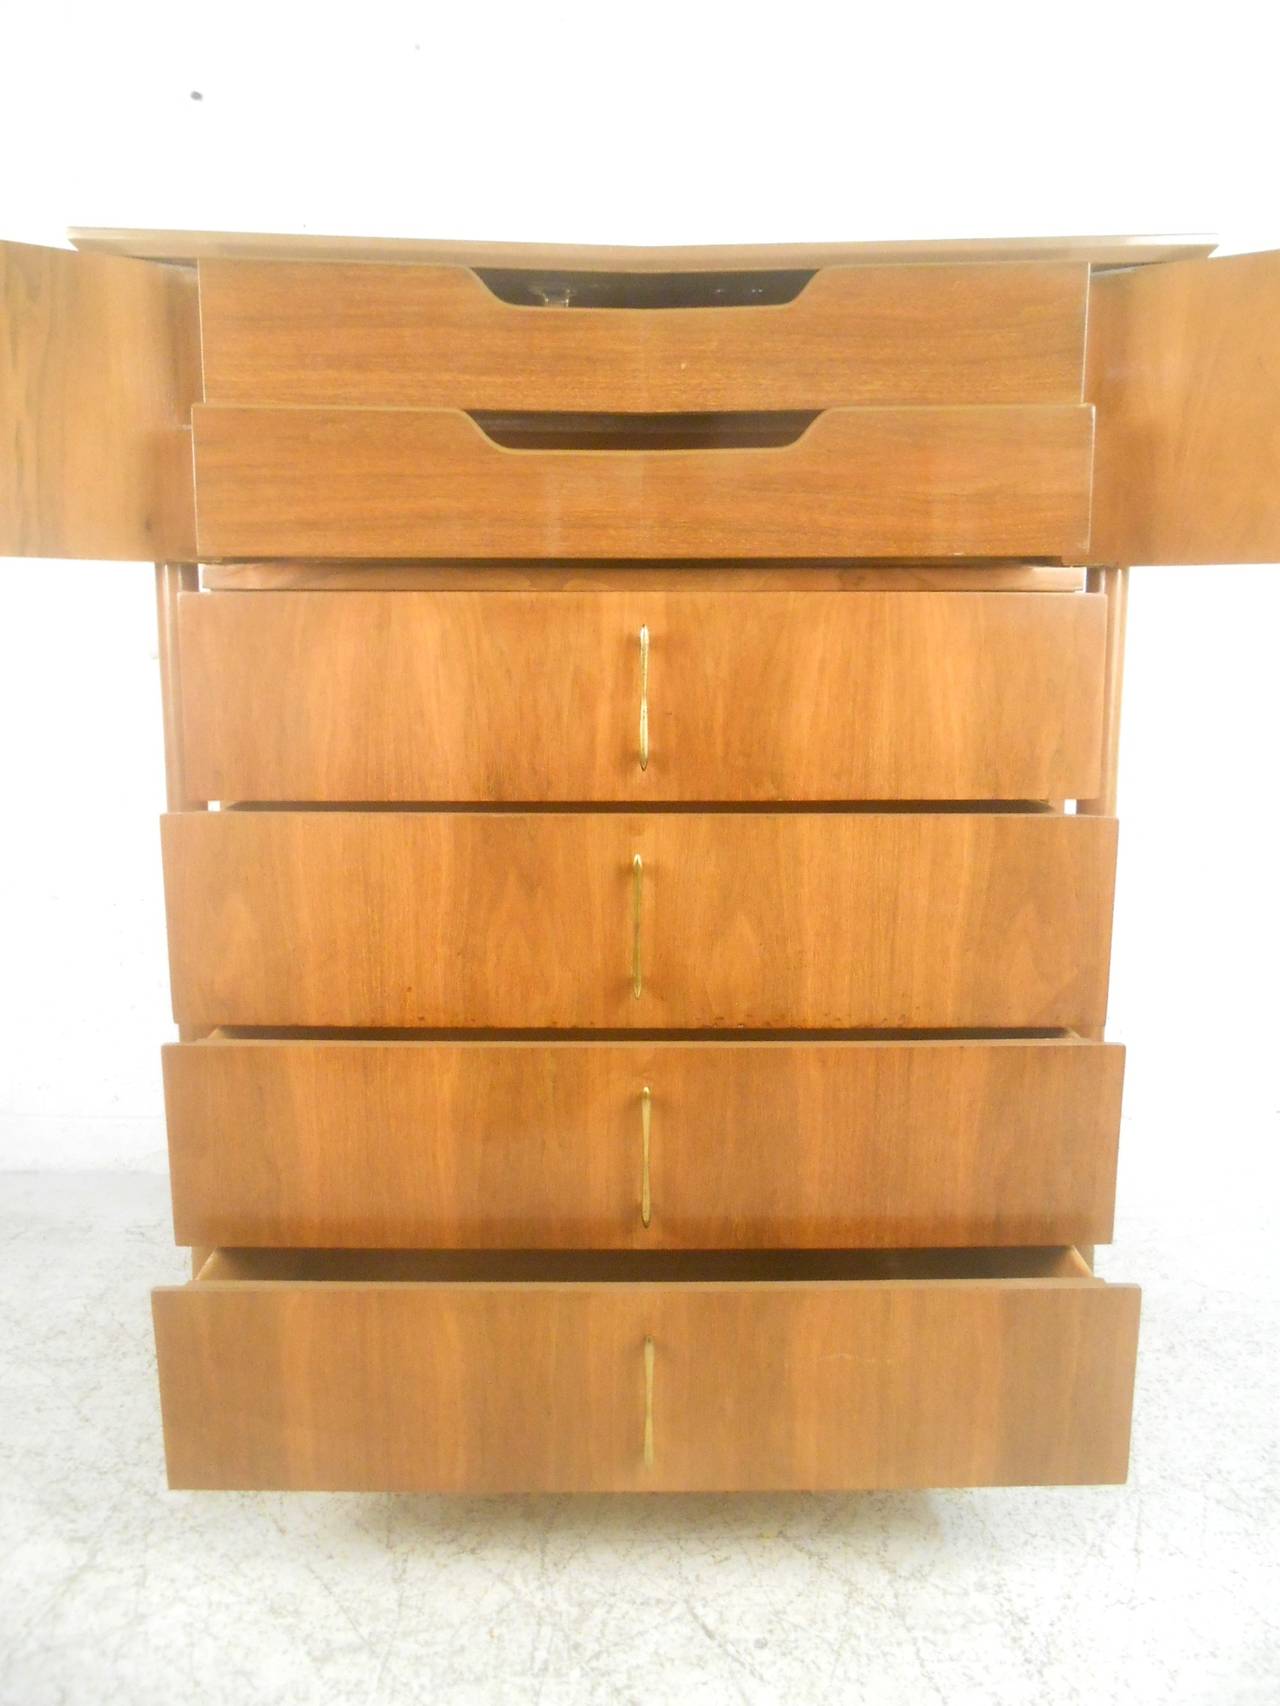 This wonderful highboy dresser features stylish vintage drawer and cabinet pulls as well as unique sculpted legs. This fantastic dresser is a beautiful addition to any room and offers plenty of storage space for any interior. Please confirm item